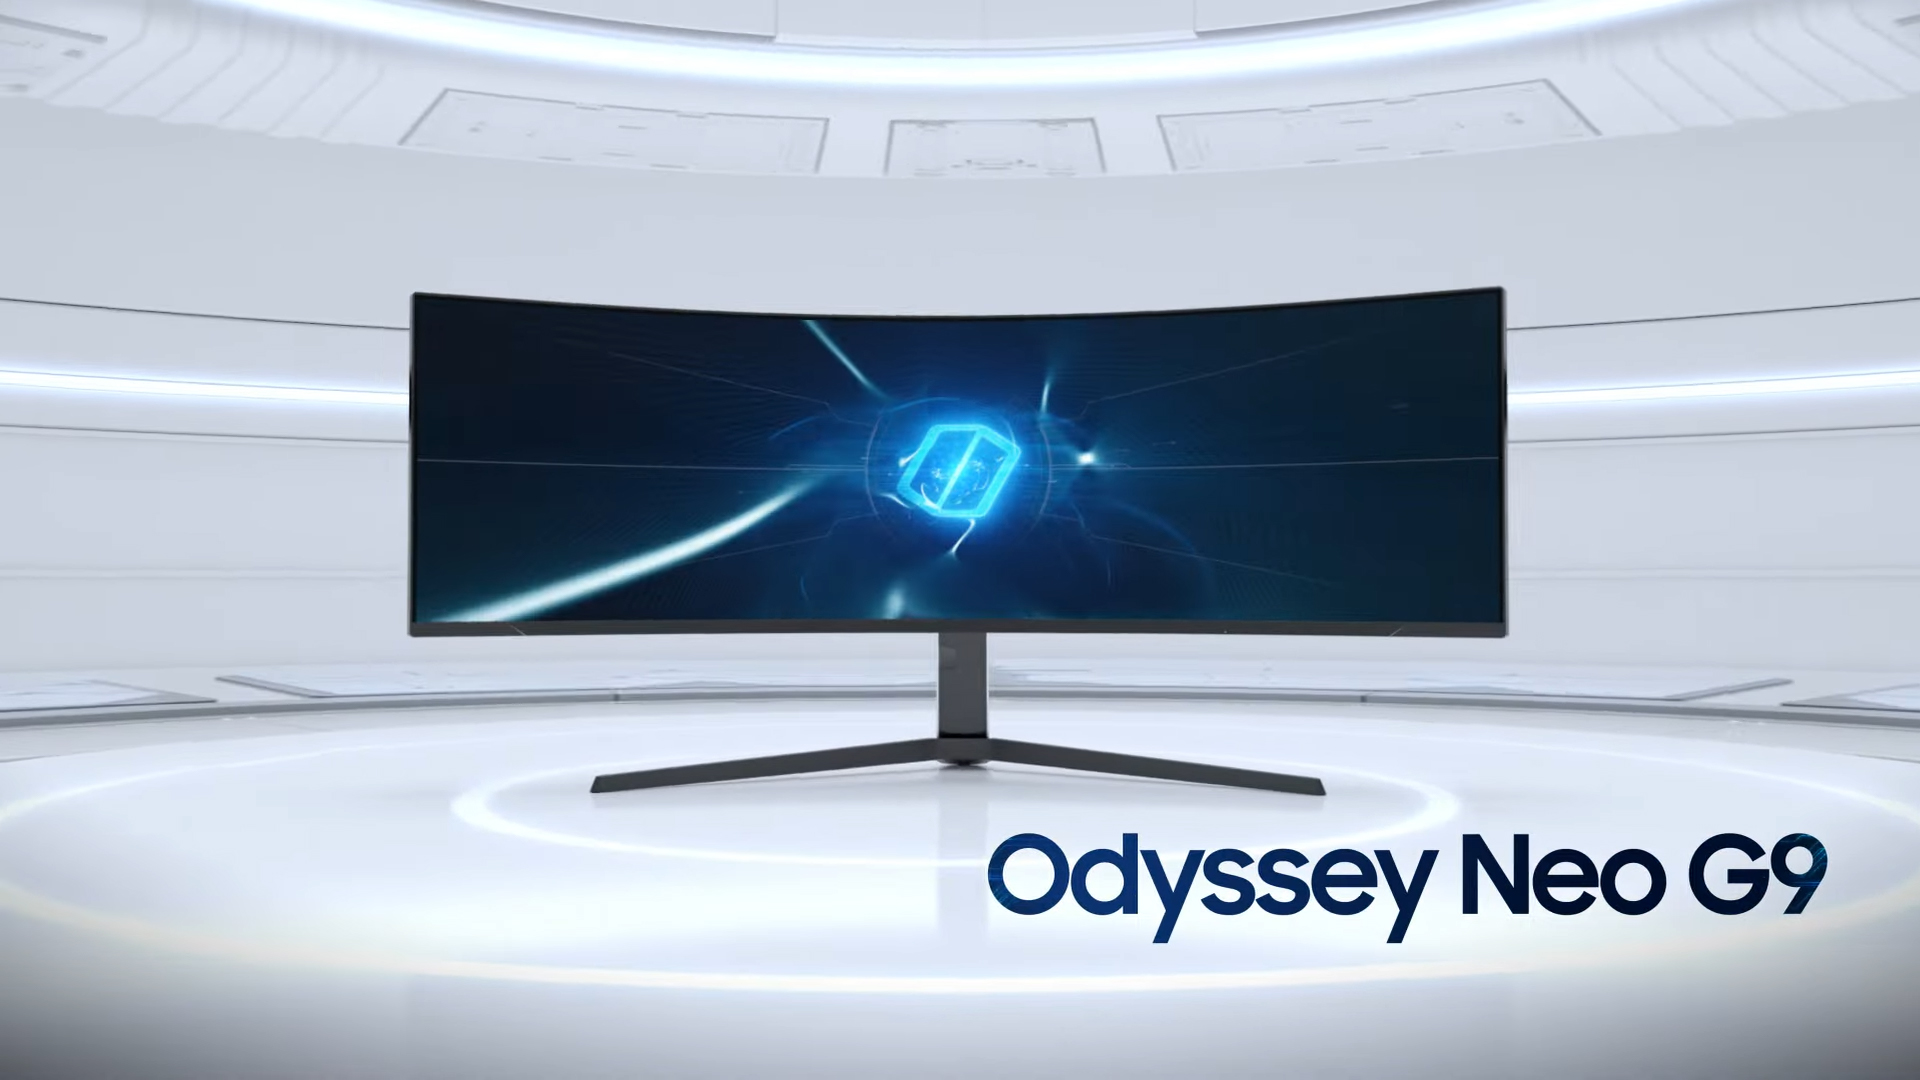 The Odyssey Neo G9 is Samsung's first miniLED monitor! SamMobile